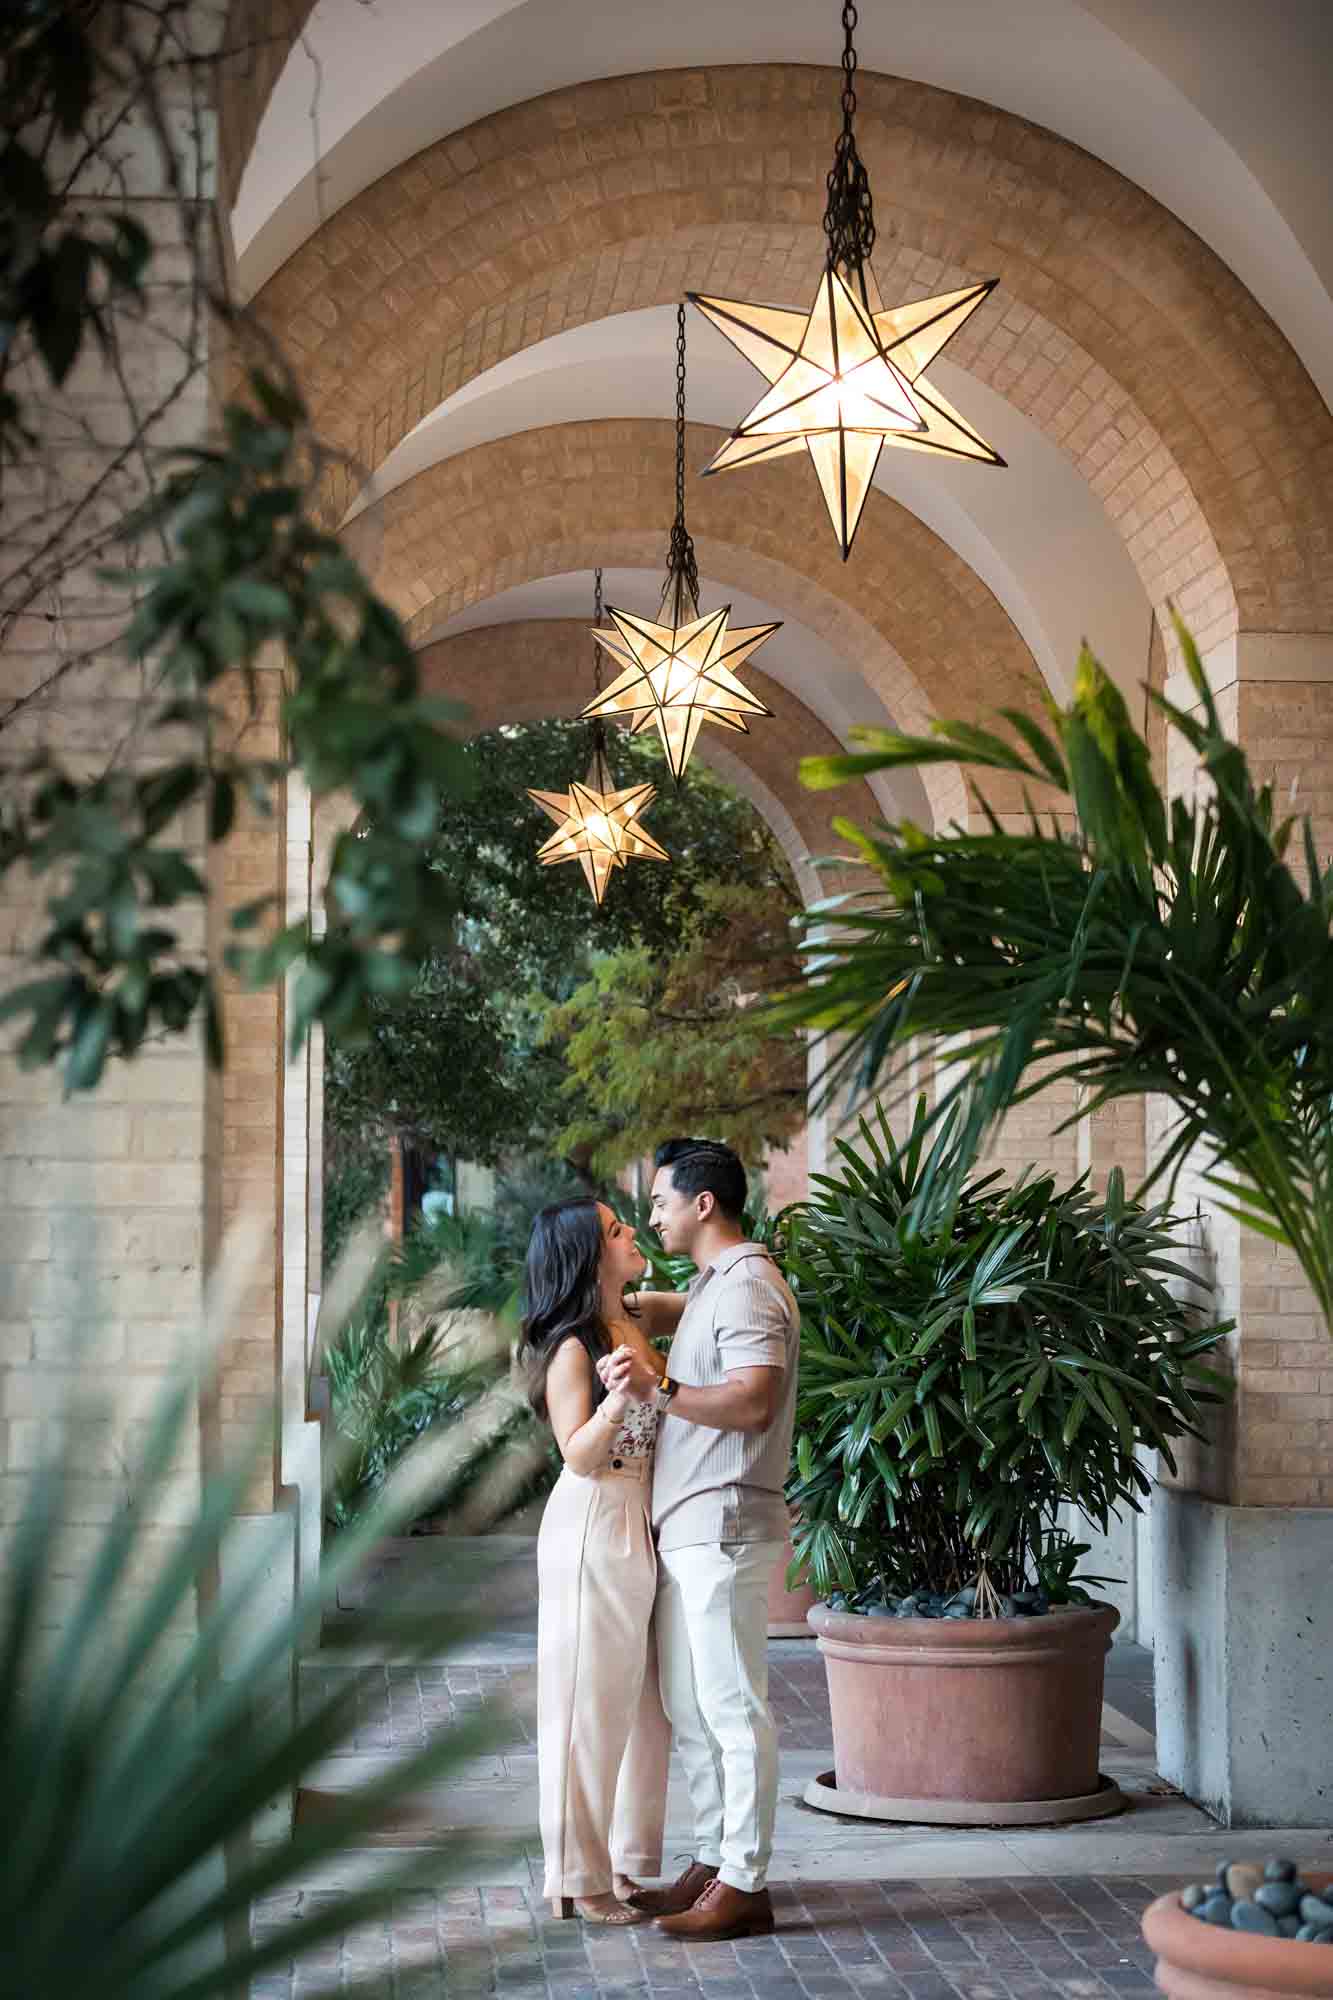 Couple dancing under star-shaped lights surrounded by plants for an article on how to propose at the Pearl